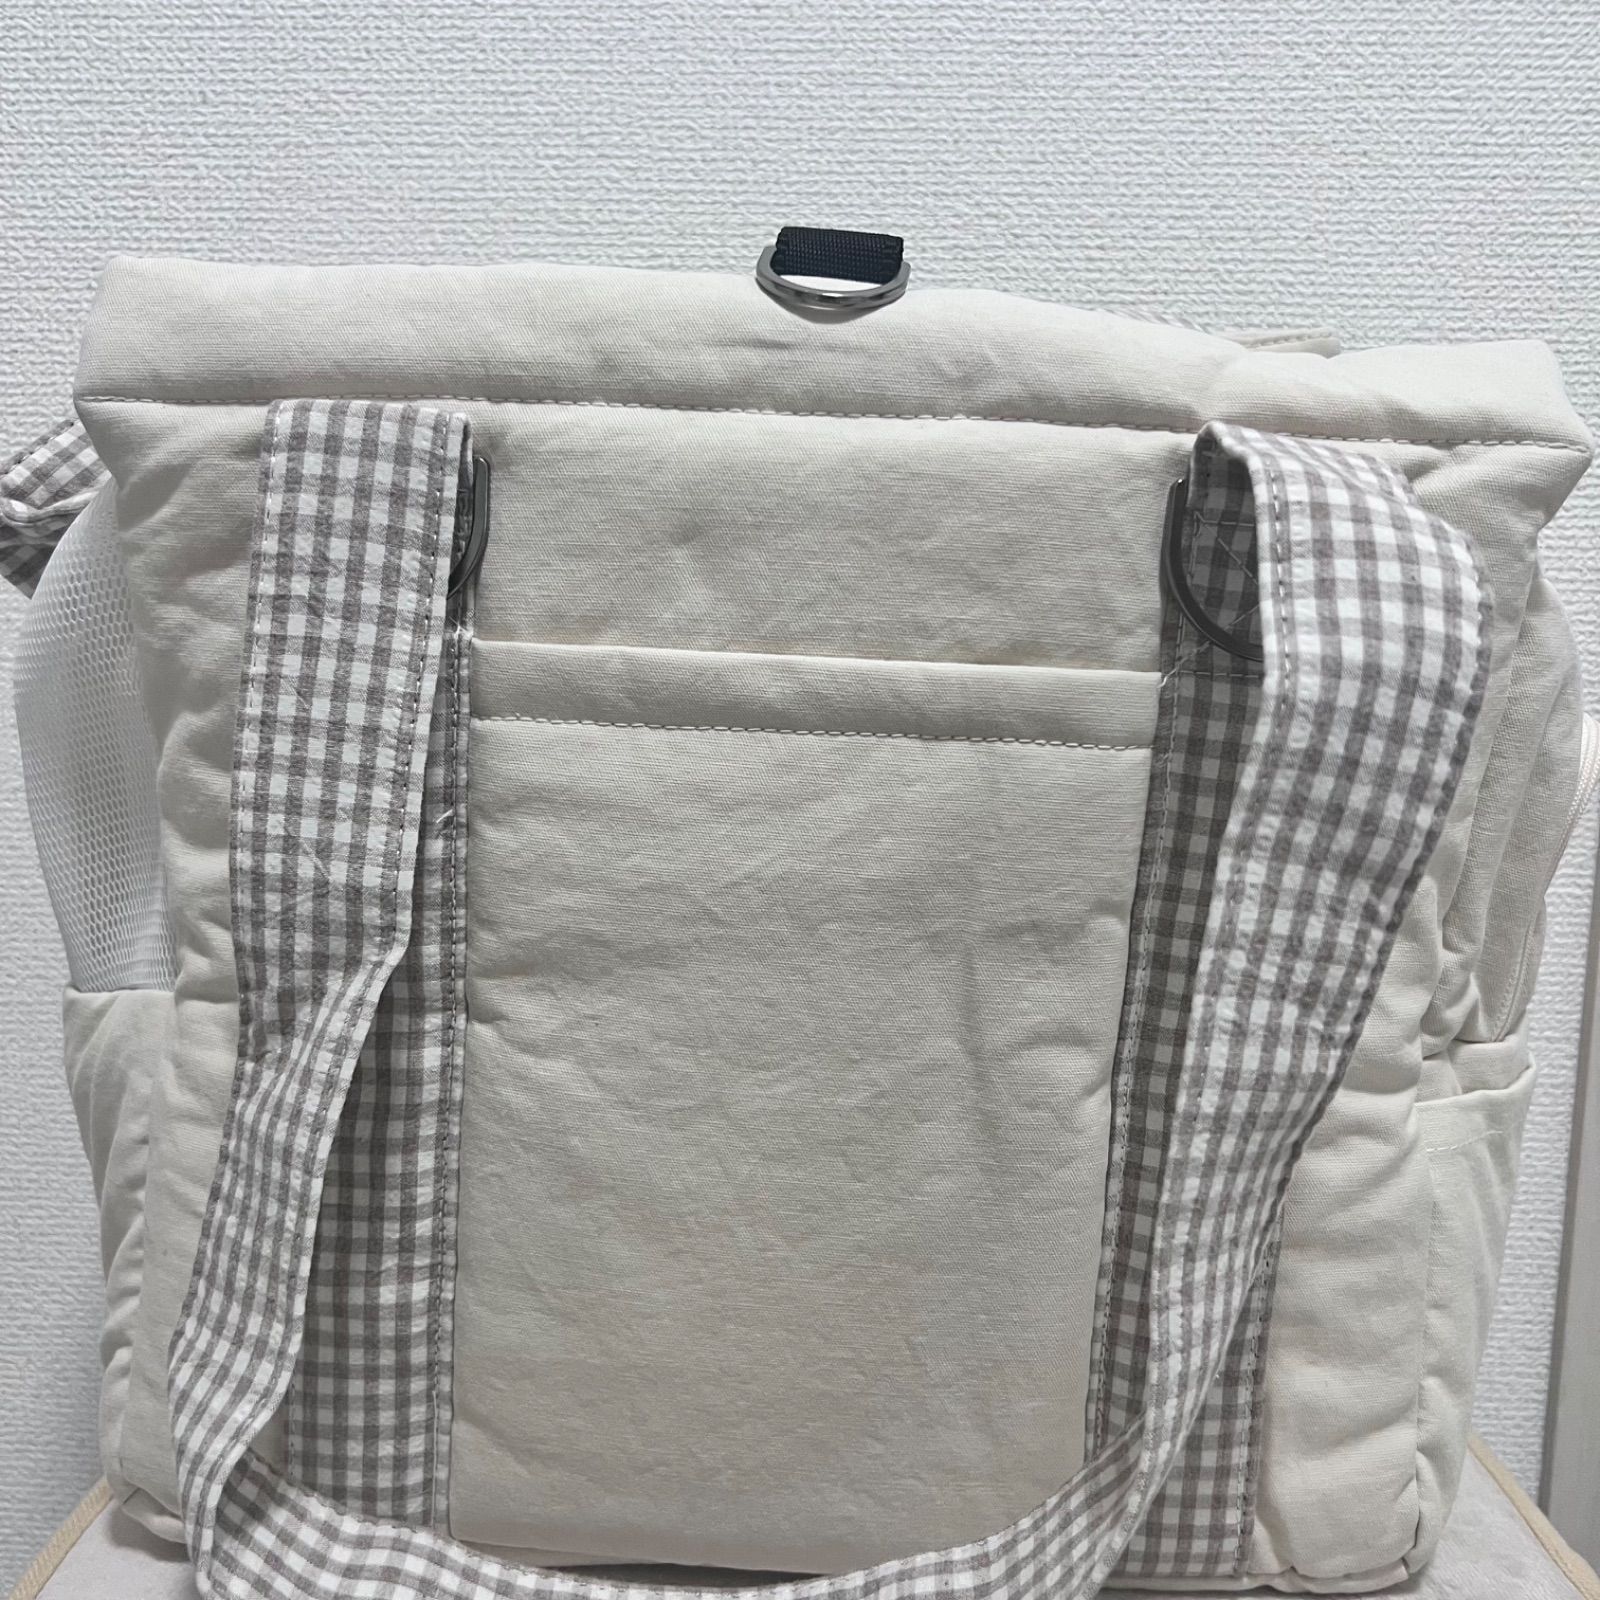 DOUBLECOMMA] THECOM BAG キャリーバッグ ペット 用品 ダブルコンマ ...